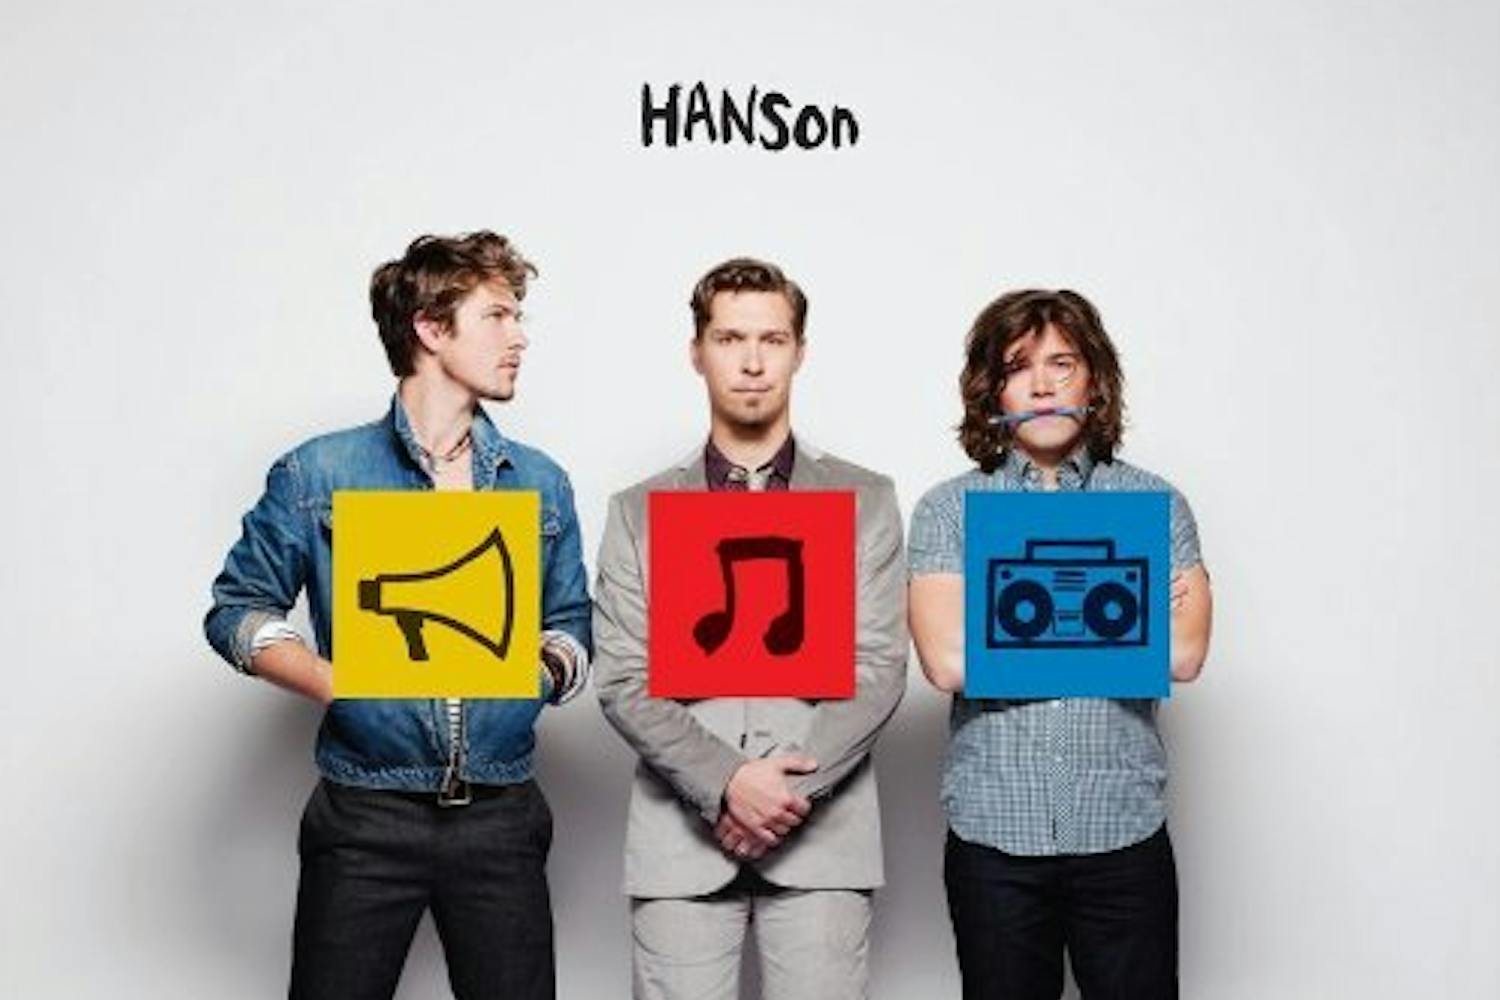 Zac Hanson and his brothers. Photo courtesy Cooking Vinyl/3CG.